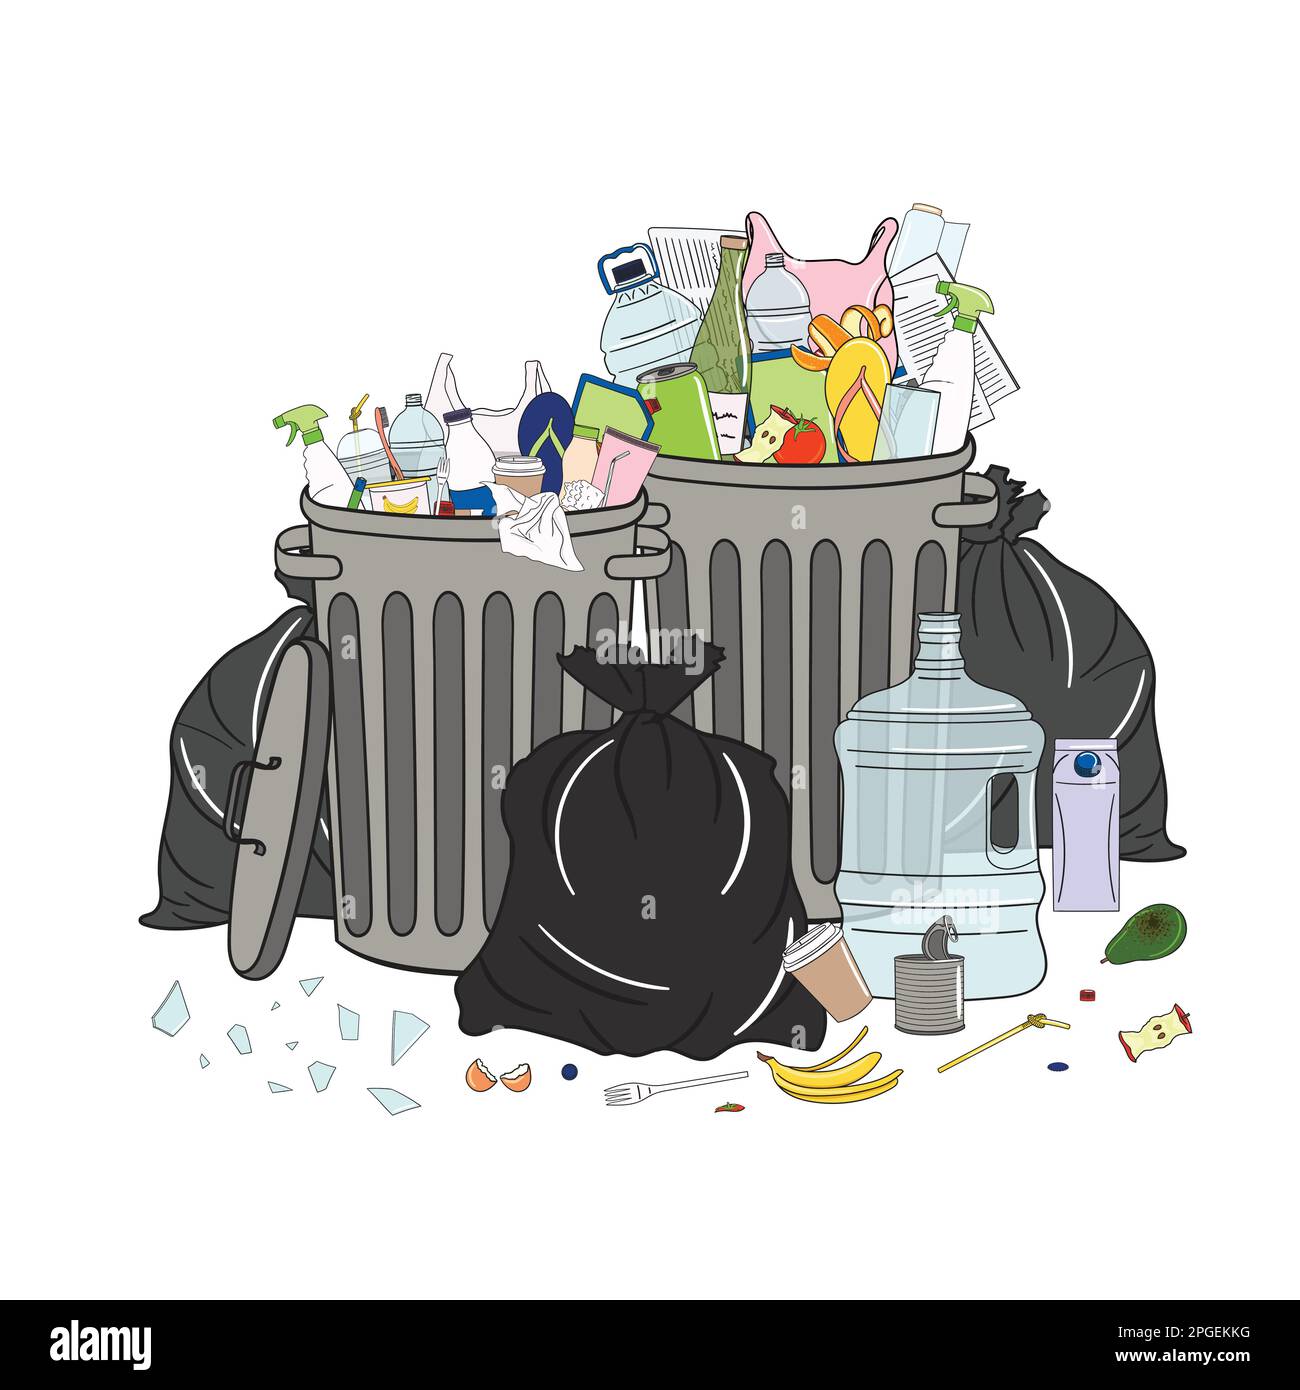 Still trash cans full of garbage and pile of garbage. Waste management. Garbage pollution. Overflowing rubbish, food, metal, plastic, paper, glass, mi Stock Vector